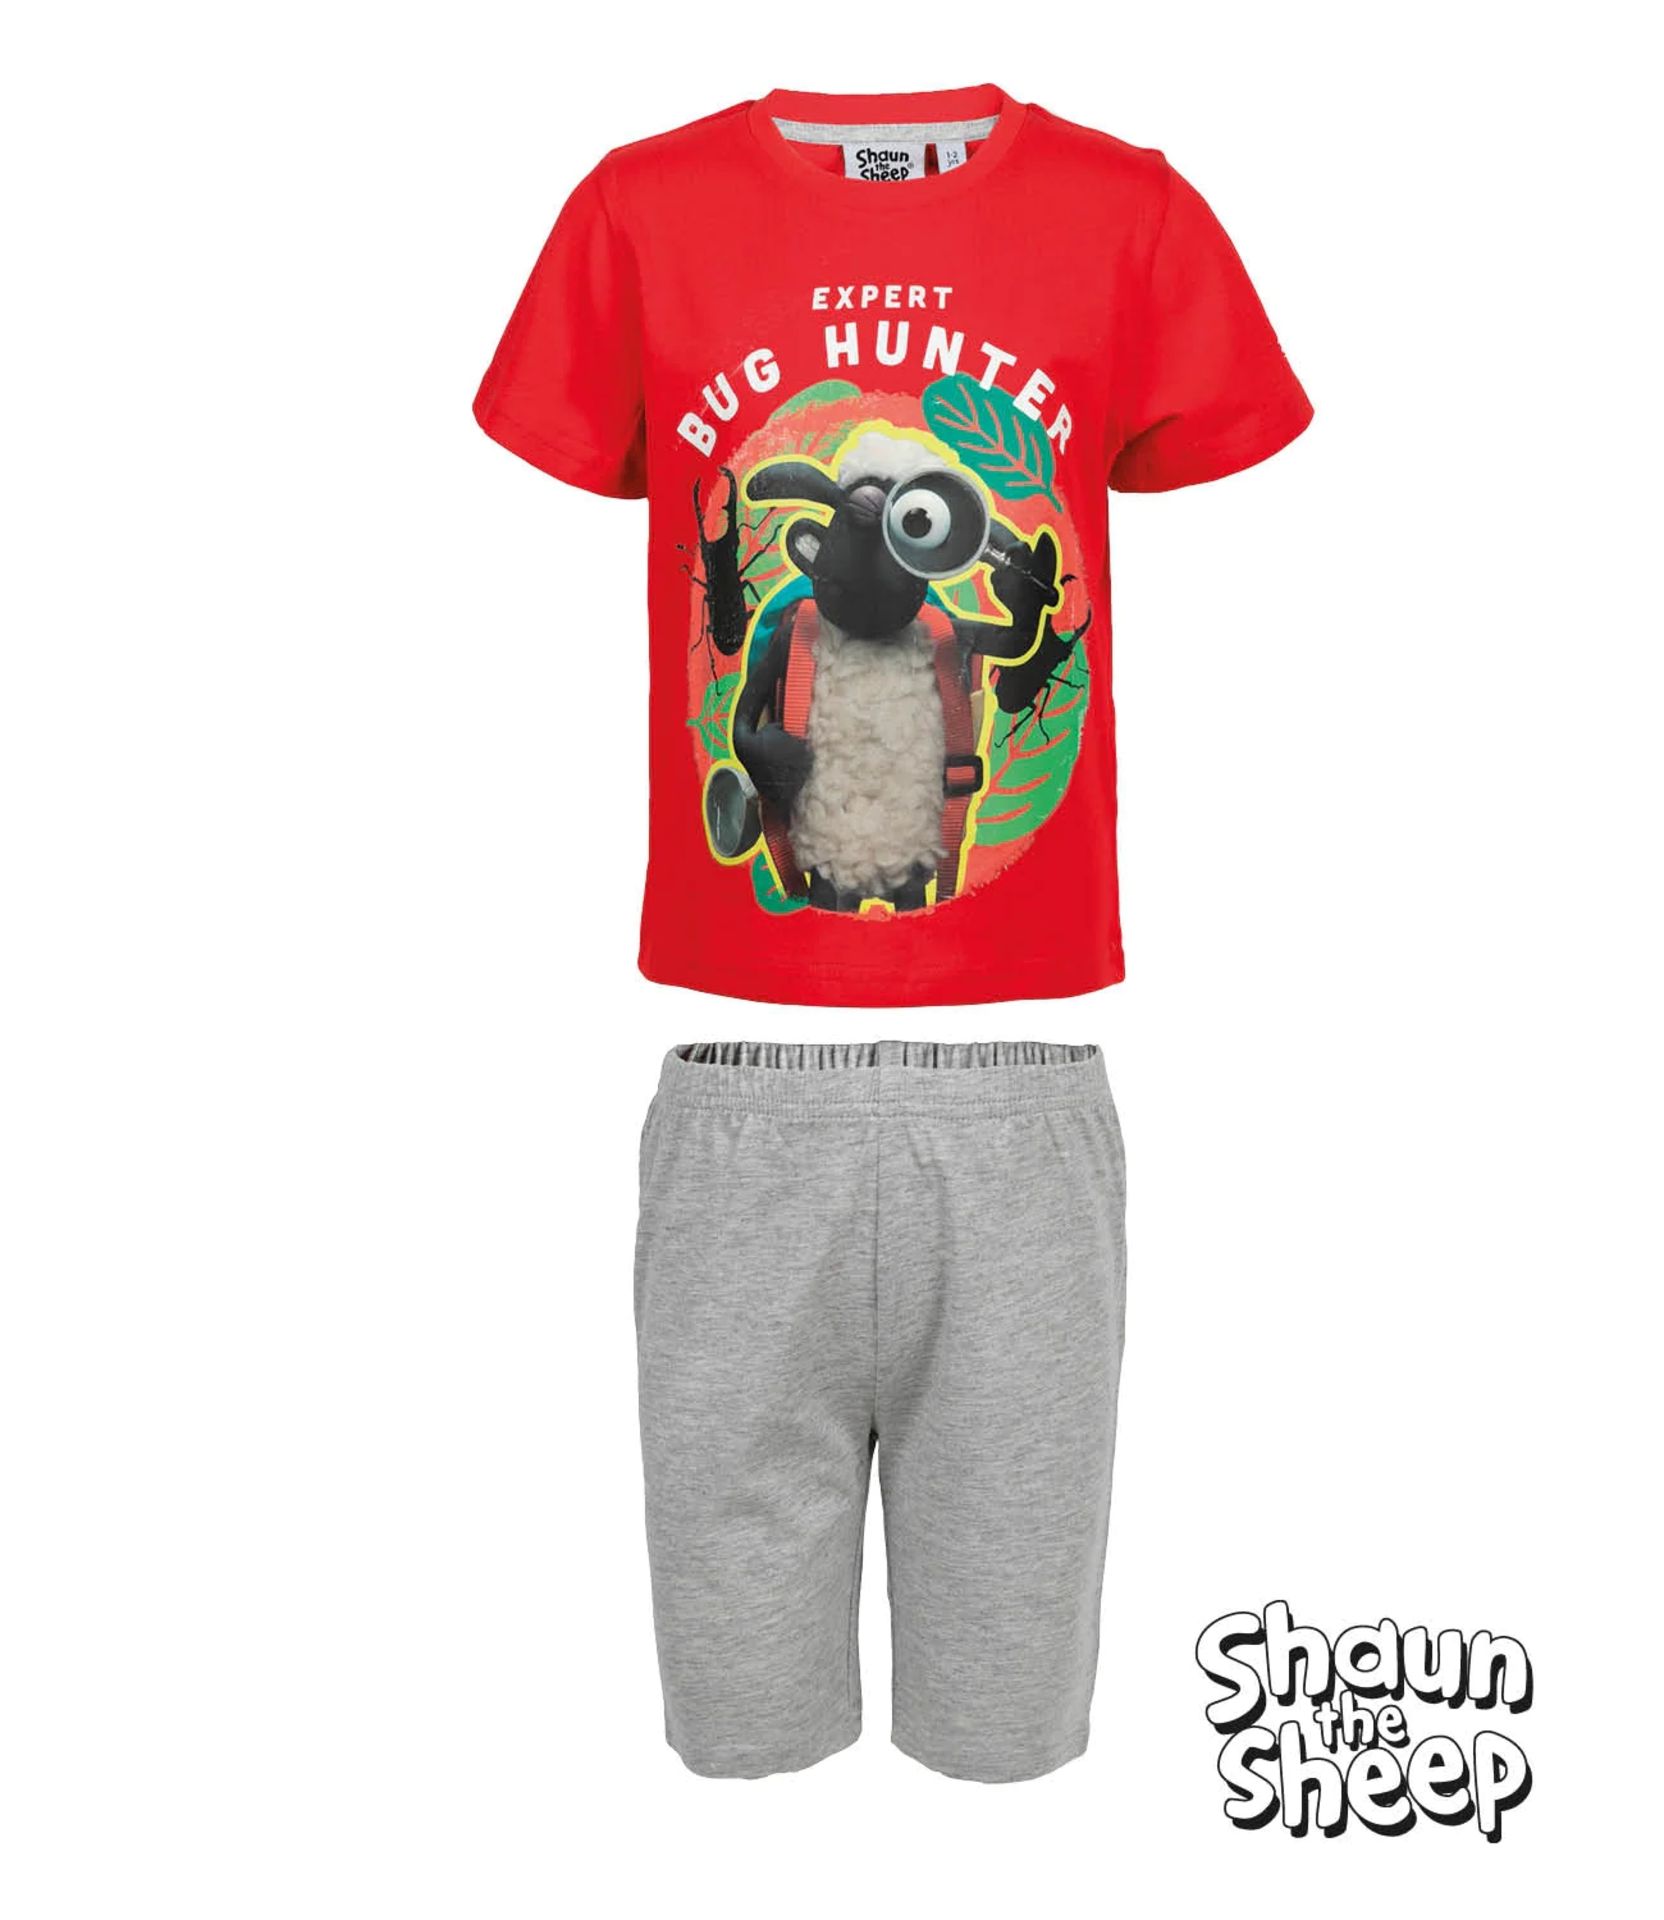 TRADE LOT 192 x New & Packaged Official Licenced Shaun The Sheep Pajamas. Sizes: 1-2, 3-4, 5-6 & 7- - Image 3 of 3